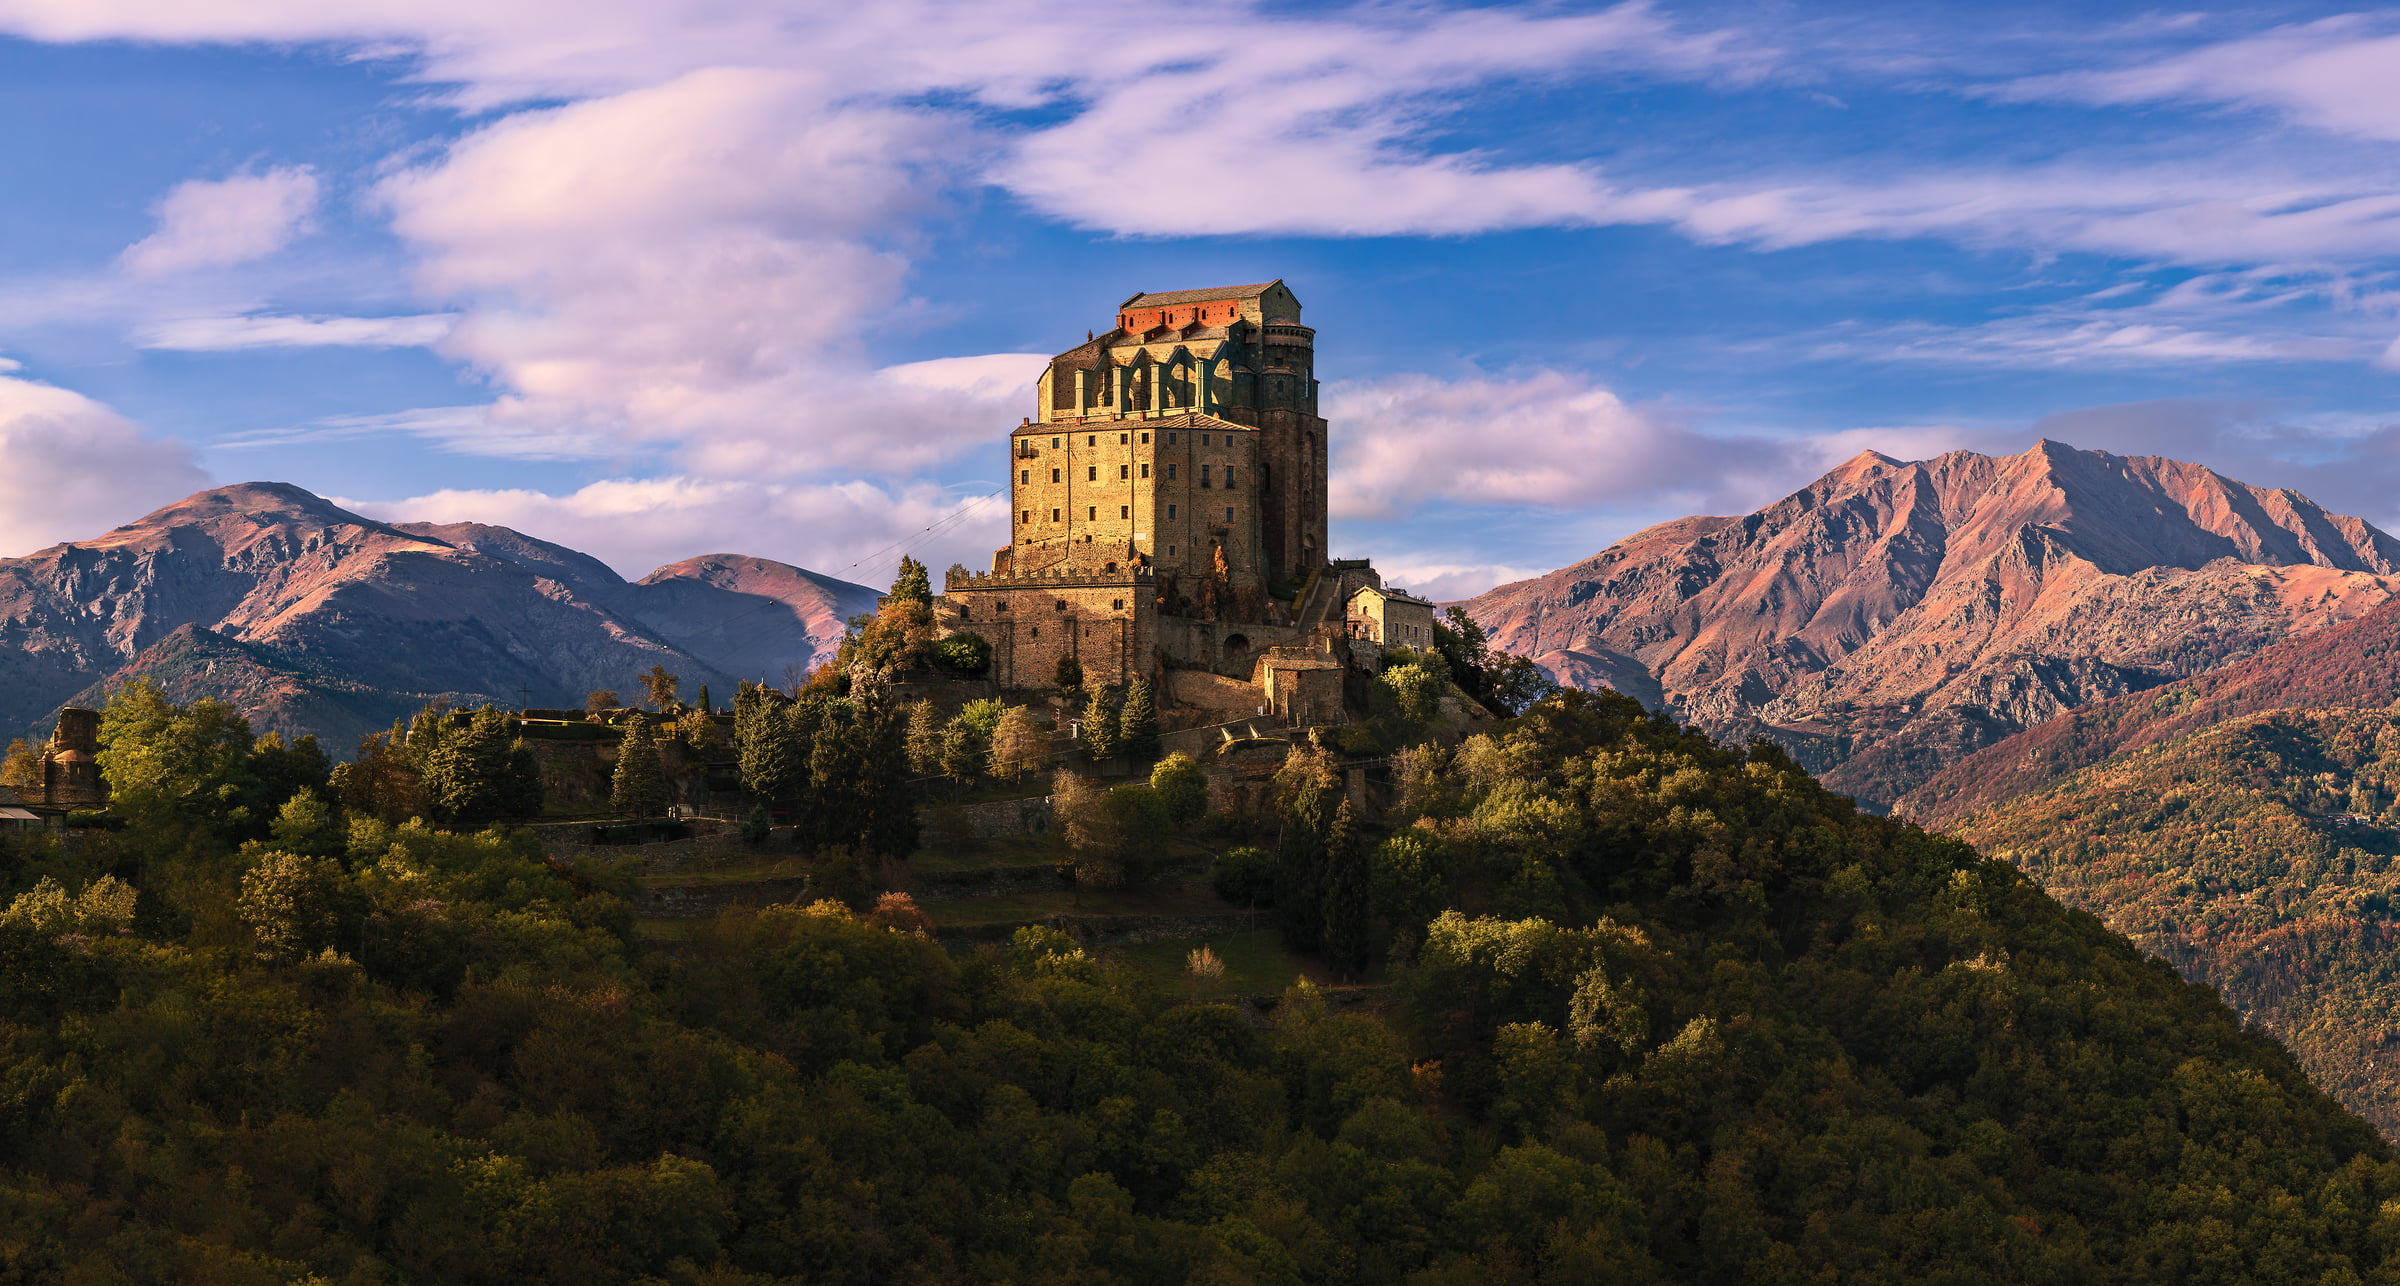 822 megapixels! A very high resolution, large-format VAST photo print of a magical landscape with a religious castle on a hill; photograph created by Duilio Fiorille of Sacra di San Michele in Sant'Ambrogio di Torino, Piedmont, italy.